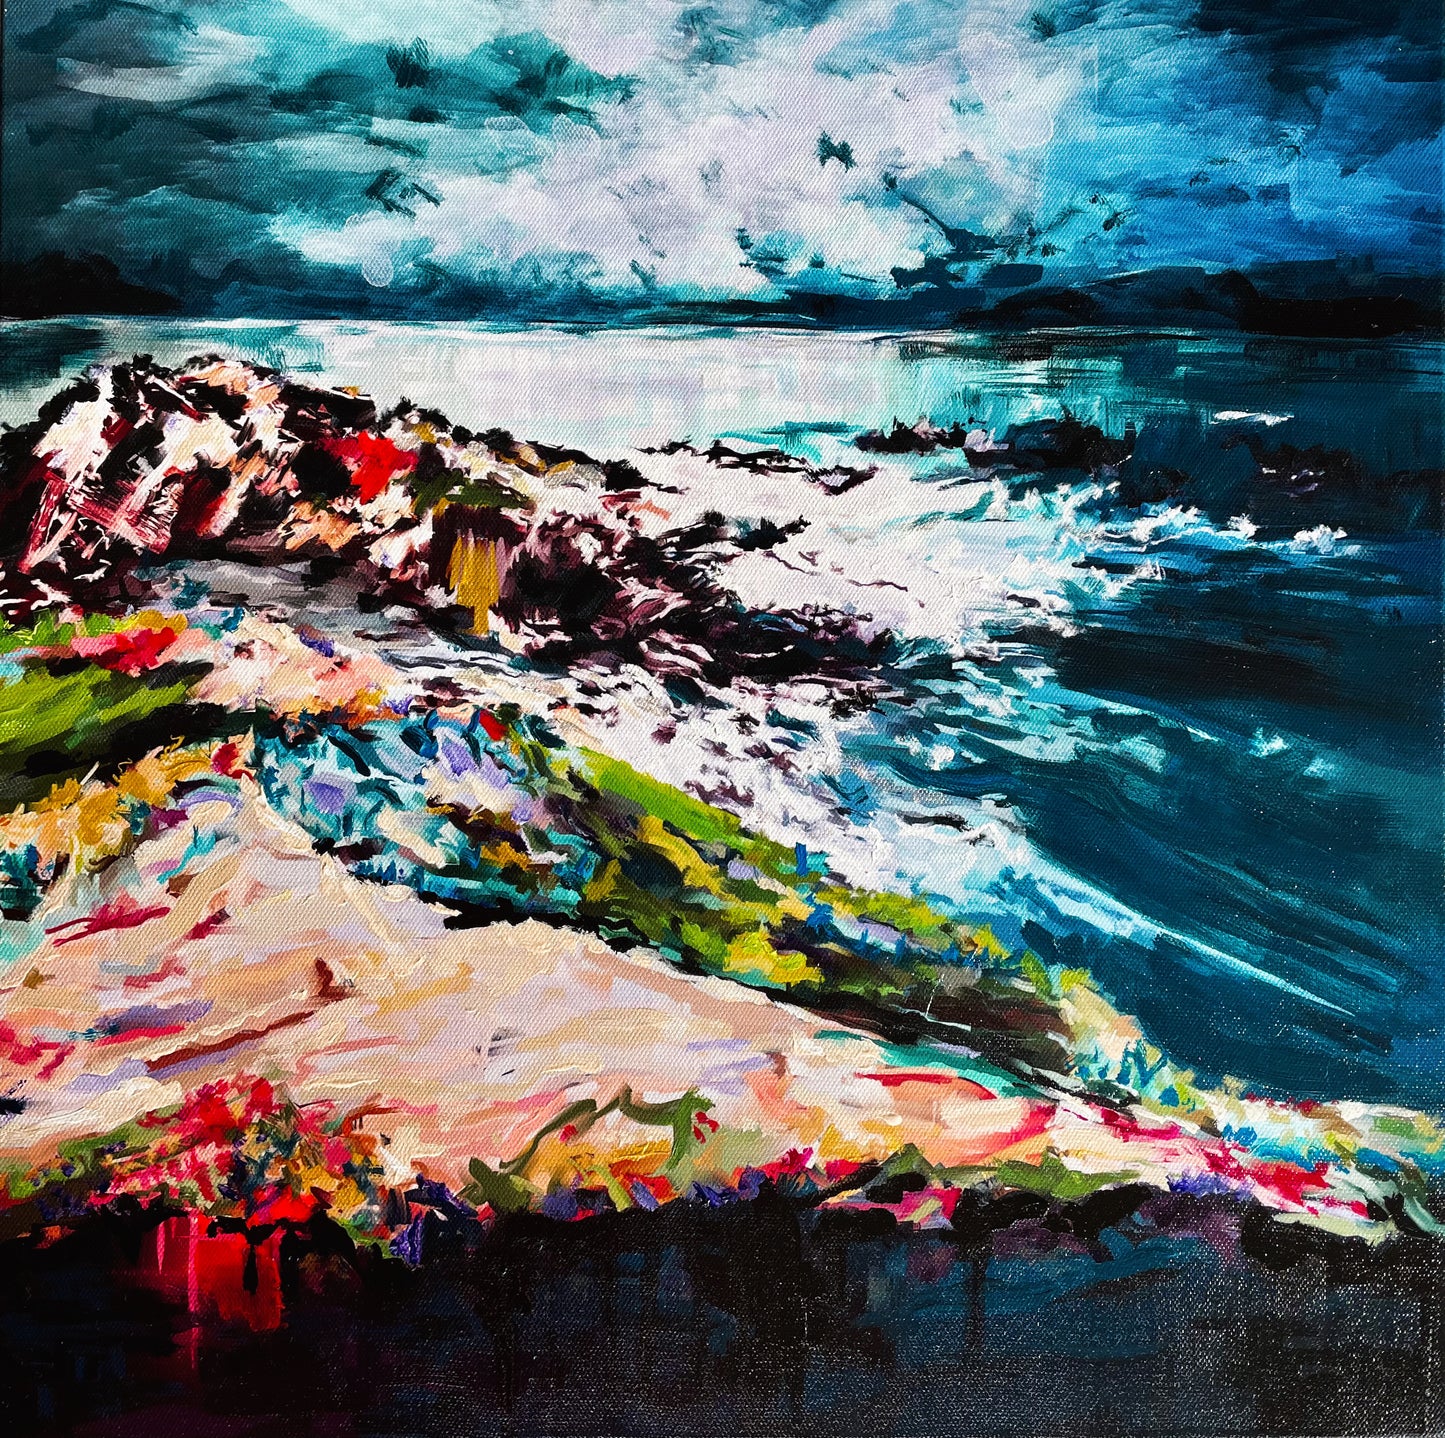 Seascape painting. Colourful original art on stretched canvas, ready to hang.